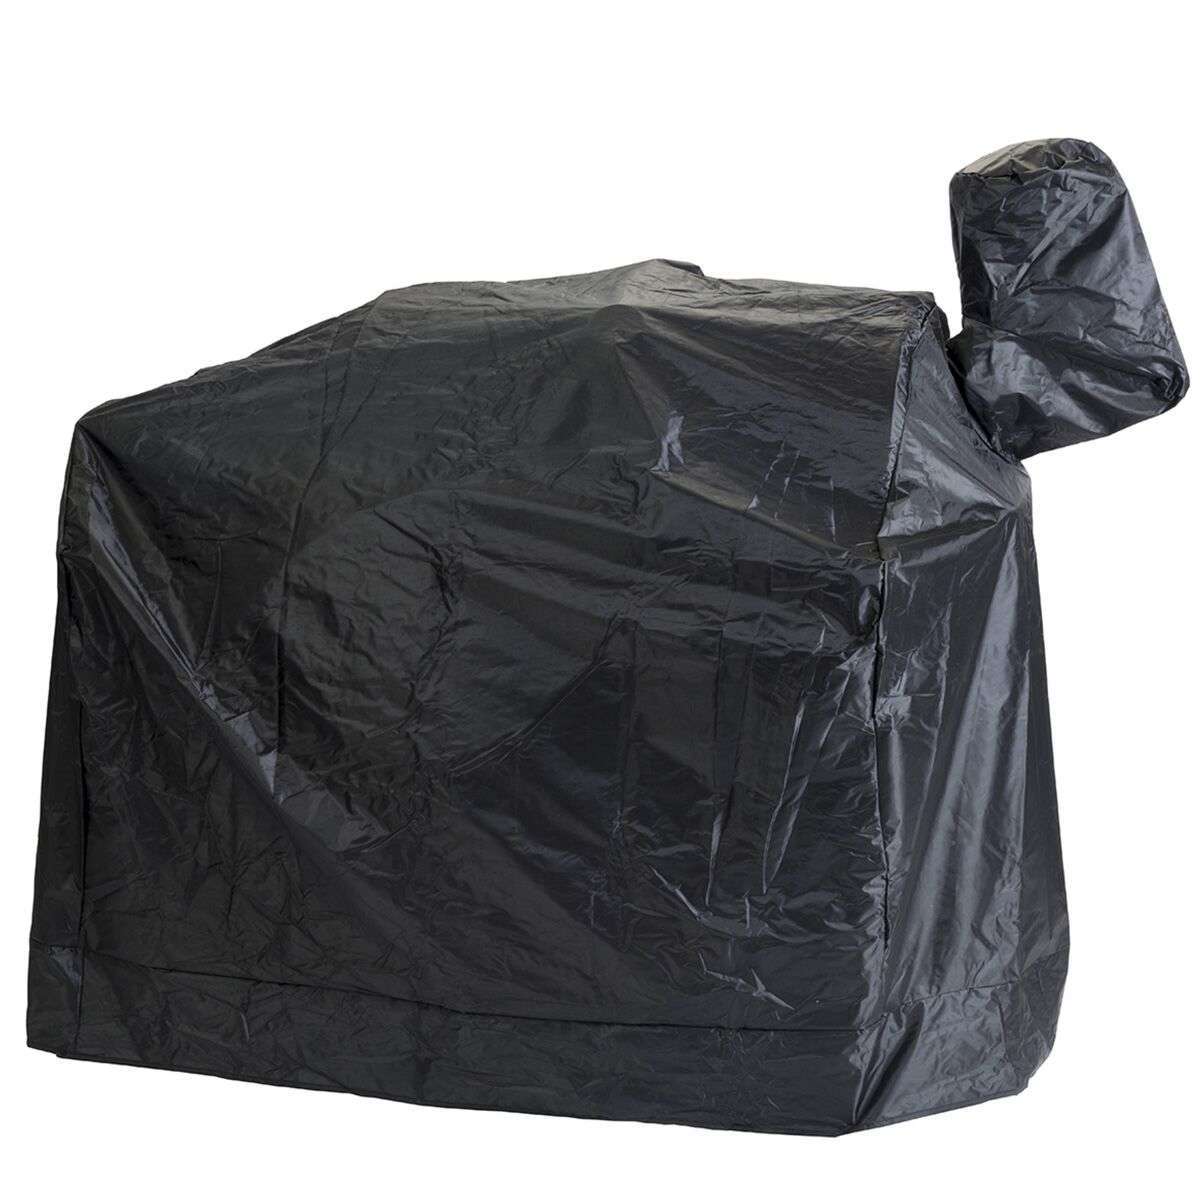 Exceptional Garden:Lifestyle Big Horn Pellet Grill BBQ Cover